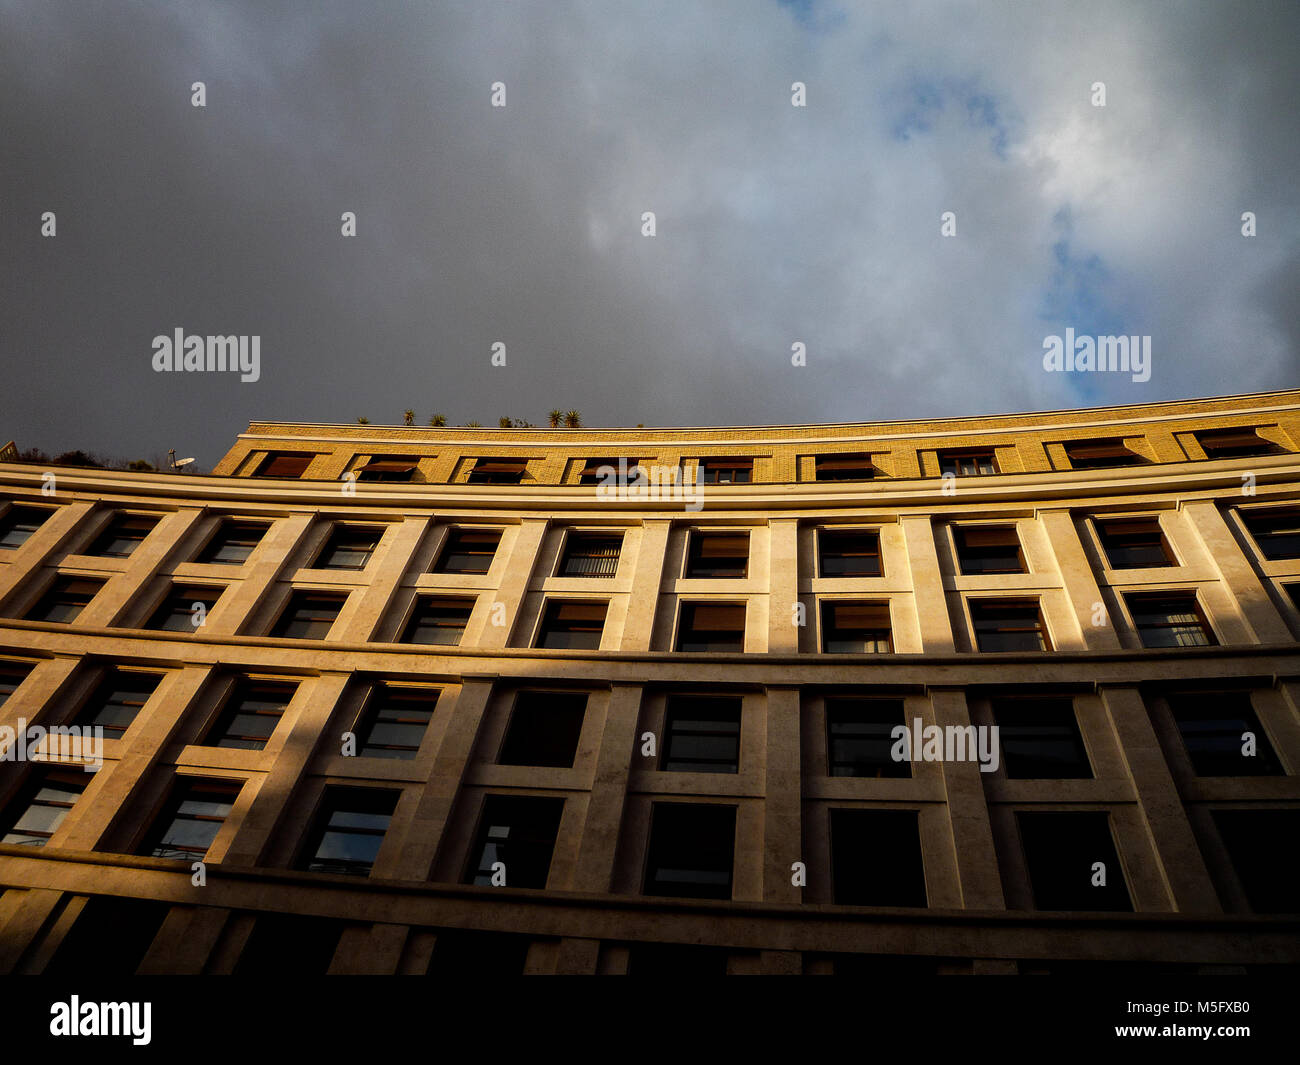 Rome, Italy: A building is illuminated by rays of sunlight before the storm Stock Photo